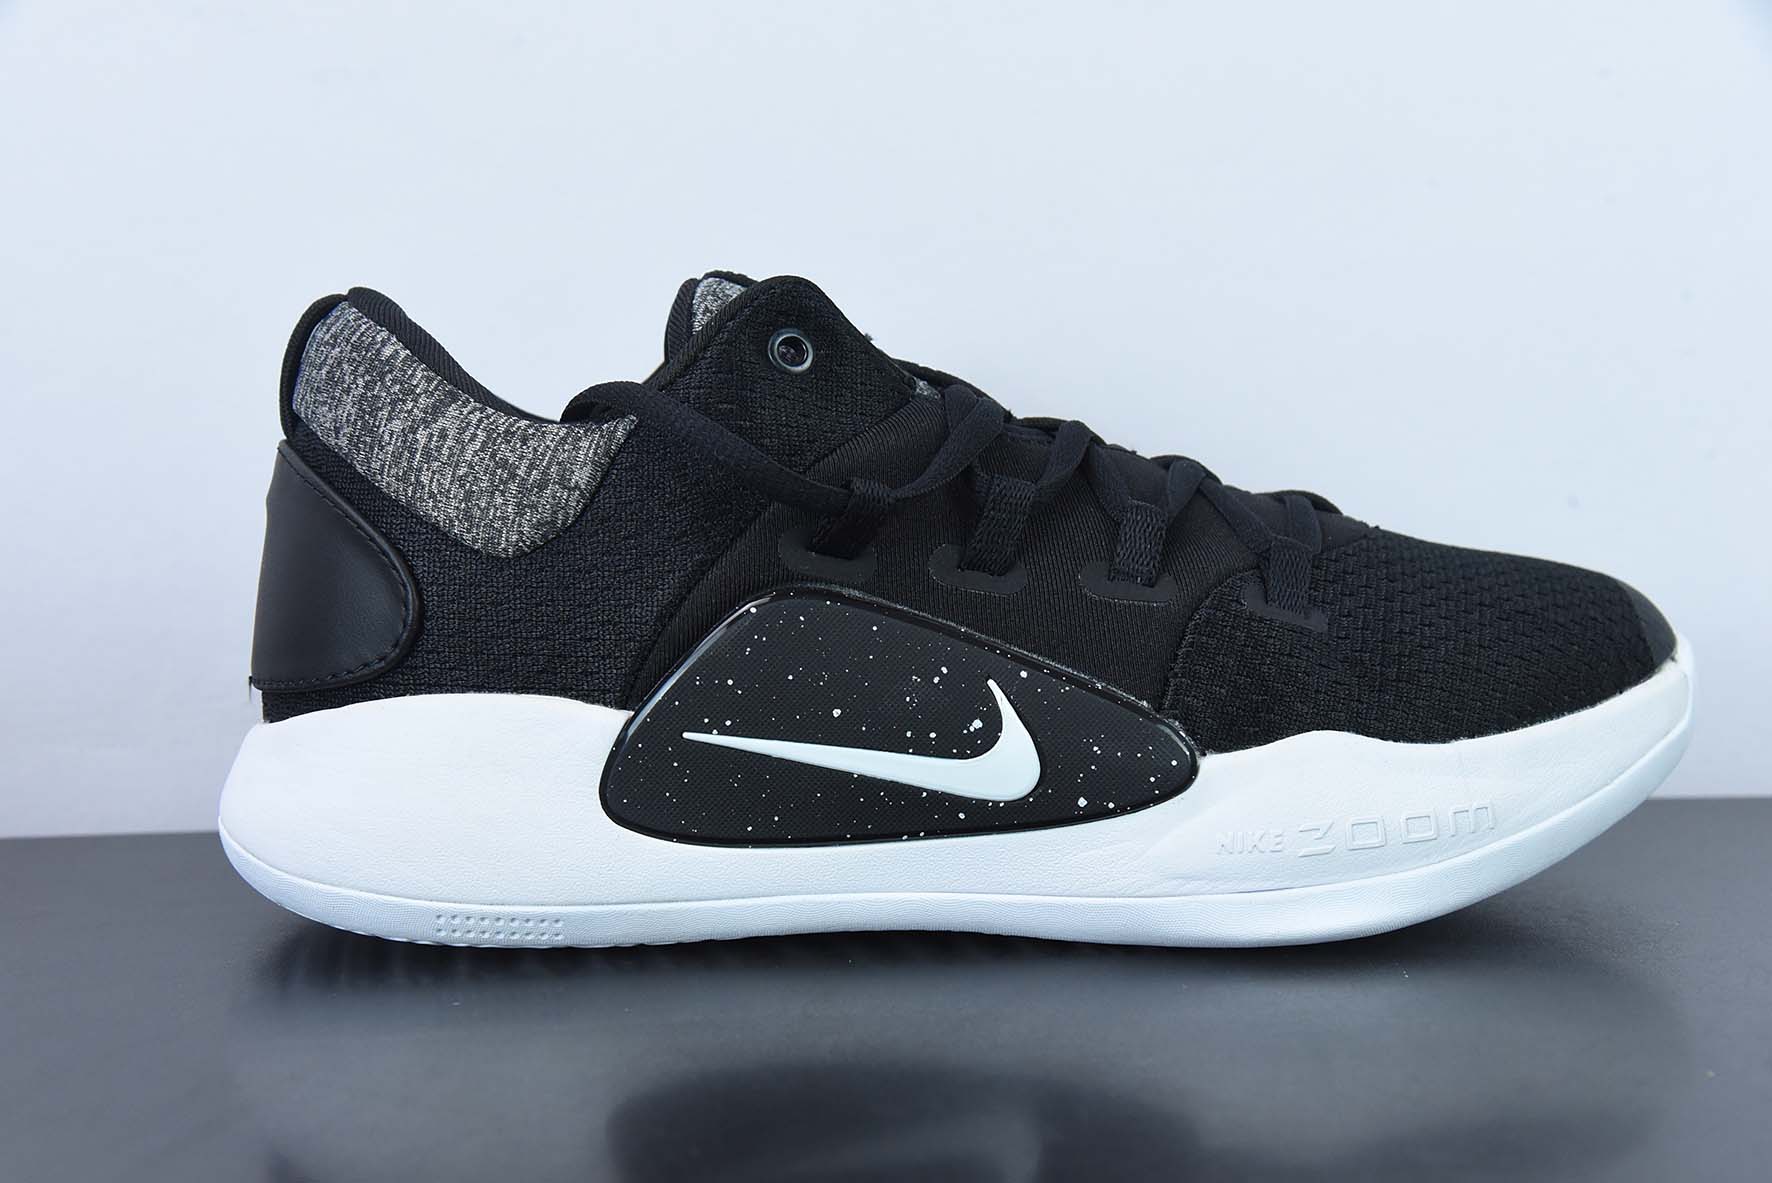 Berg maagd Kluisje Nike Hyperdunk X Low Oreo AR0465 - nike total core mesh mens sneakers for  women - 003 For Sale – nike lebron soldier 10 price philippines news